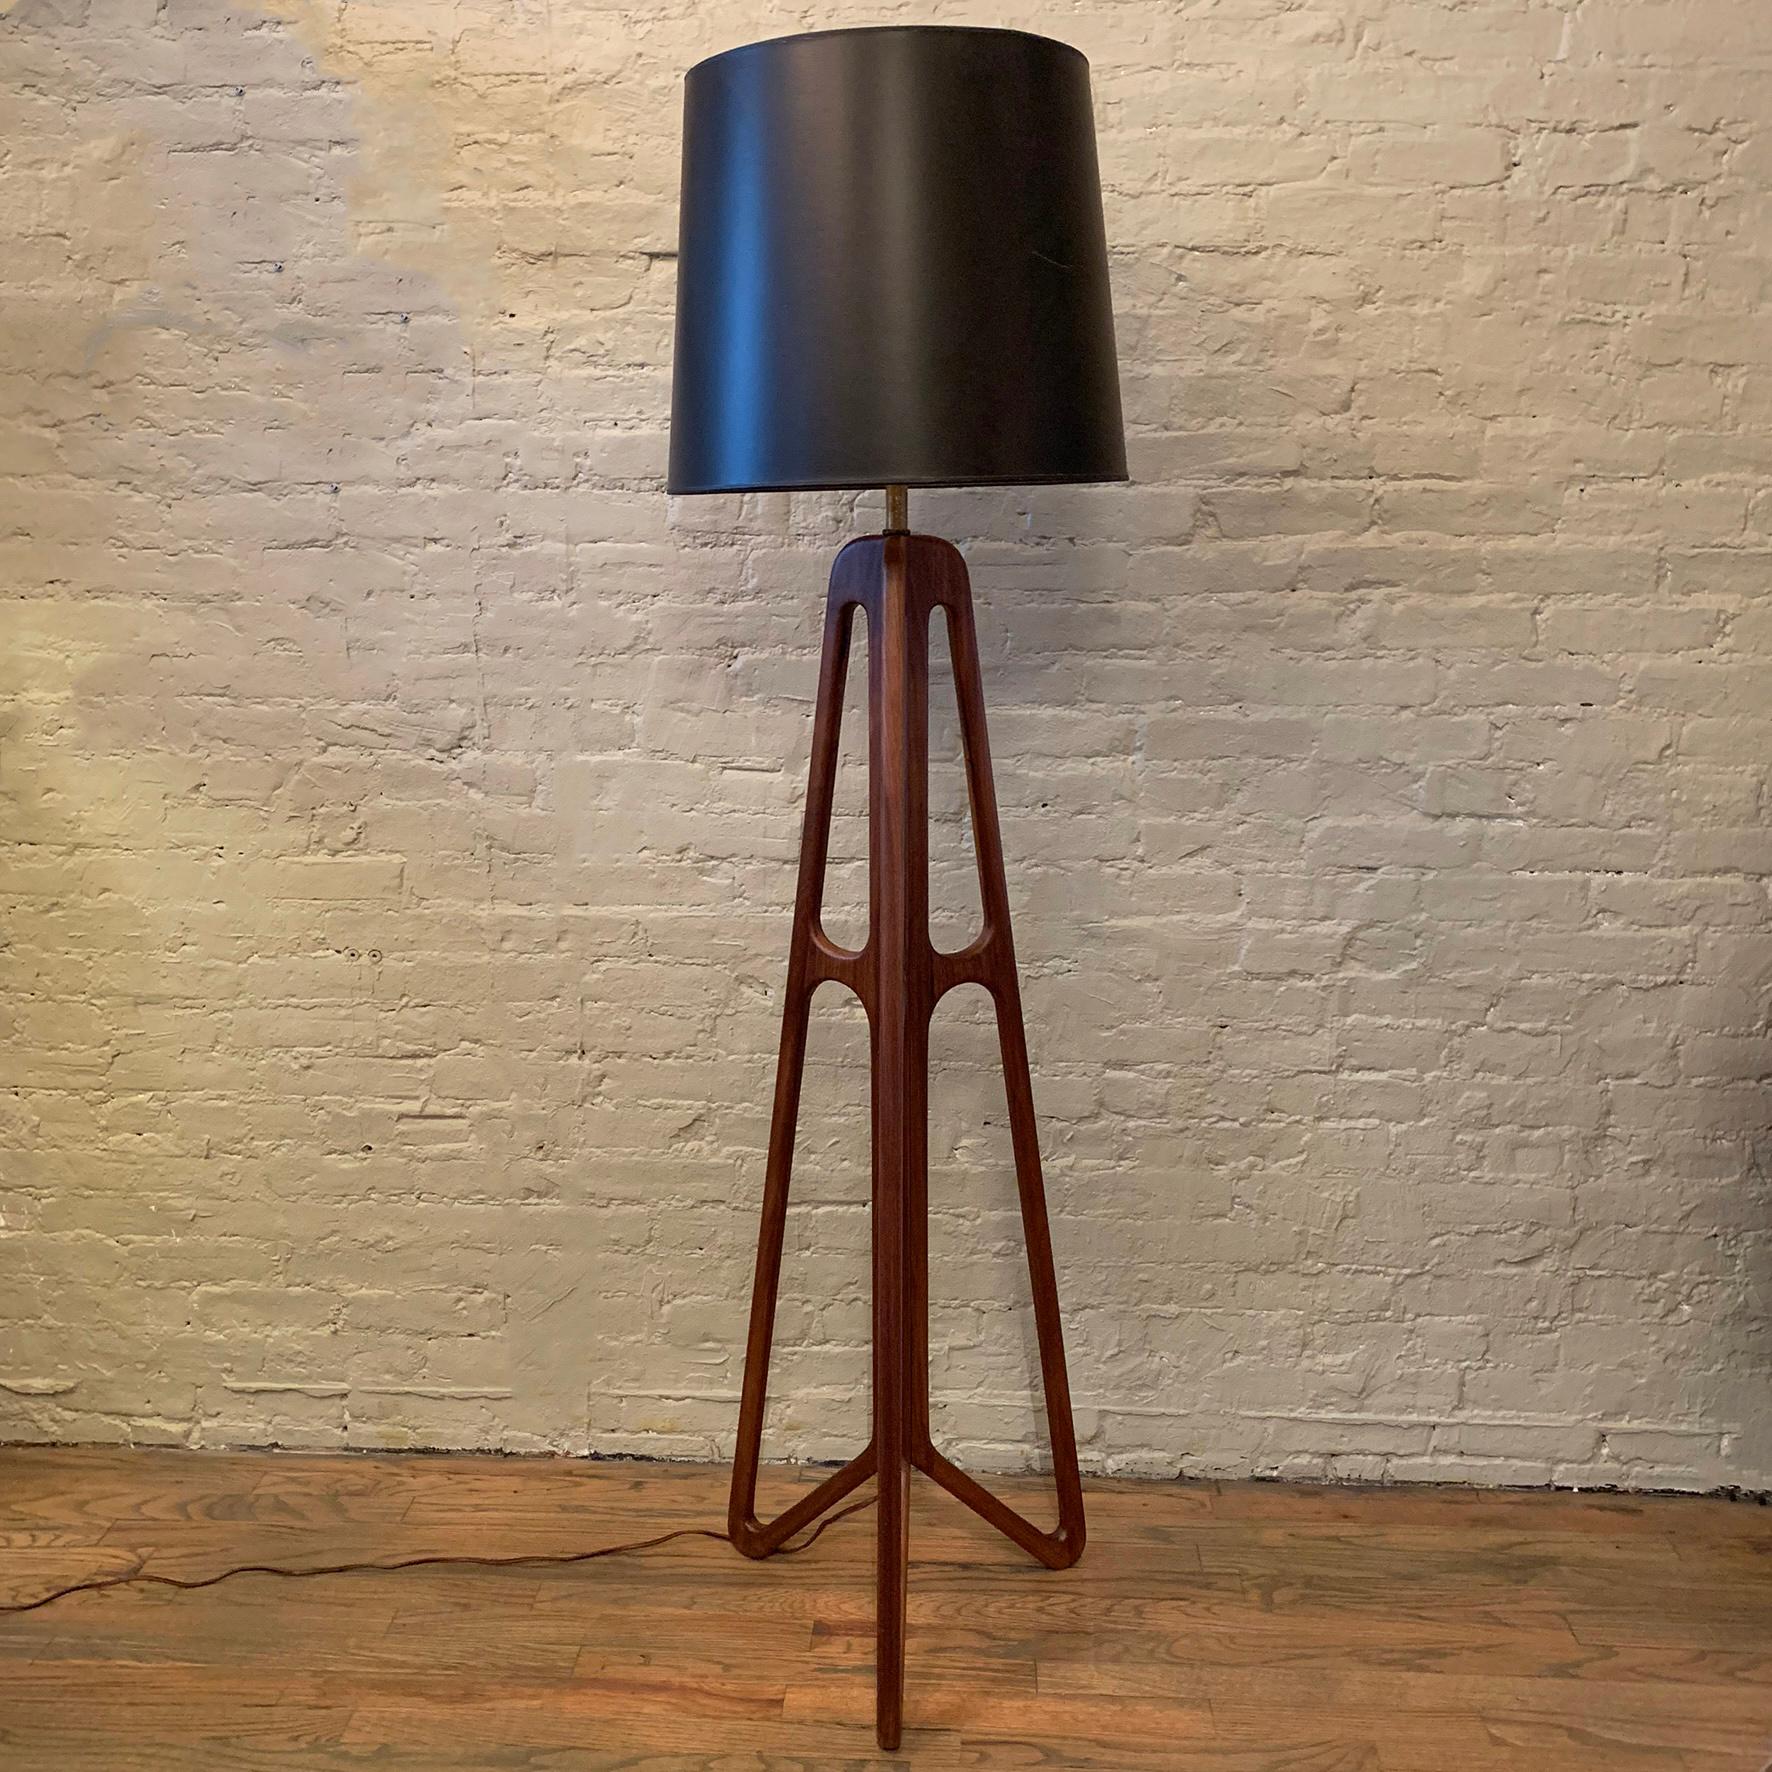 Custom, Mid-Century Modern style, floor lamp features a sculpted, solid walnut, butterfly base with brass neck, harp and finial measuring 50.5 inches to the top of the neck. The lamp is custom made in Brooklyn by City Foundry for our CF Signature.